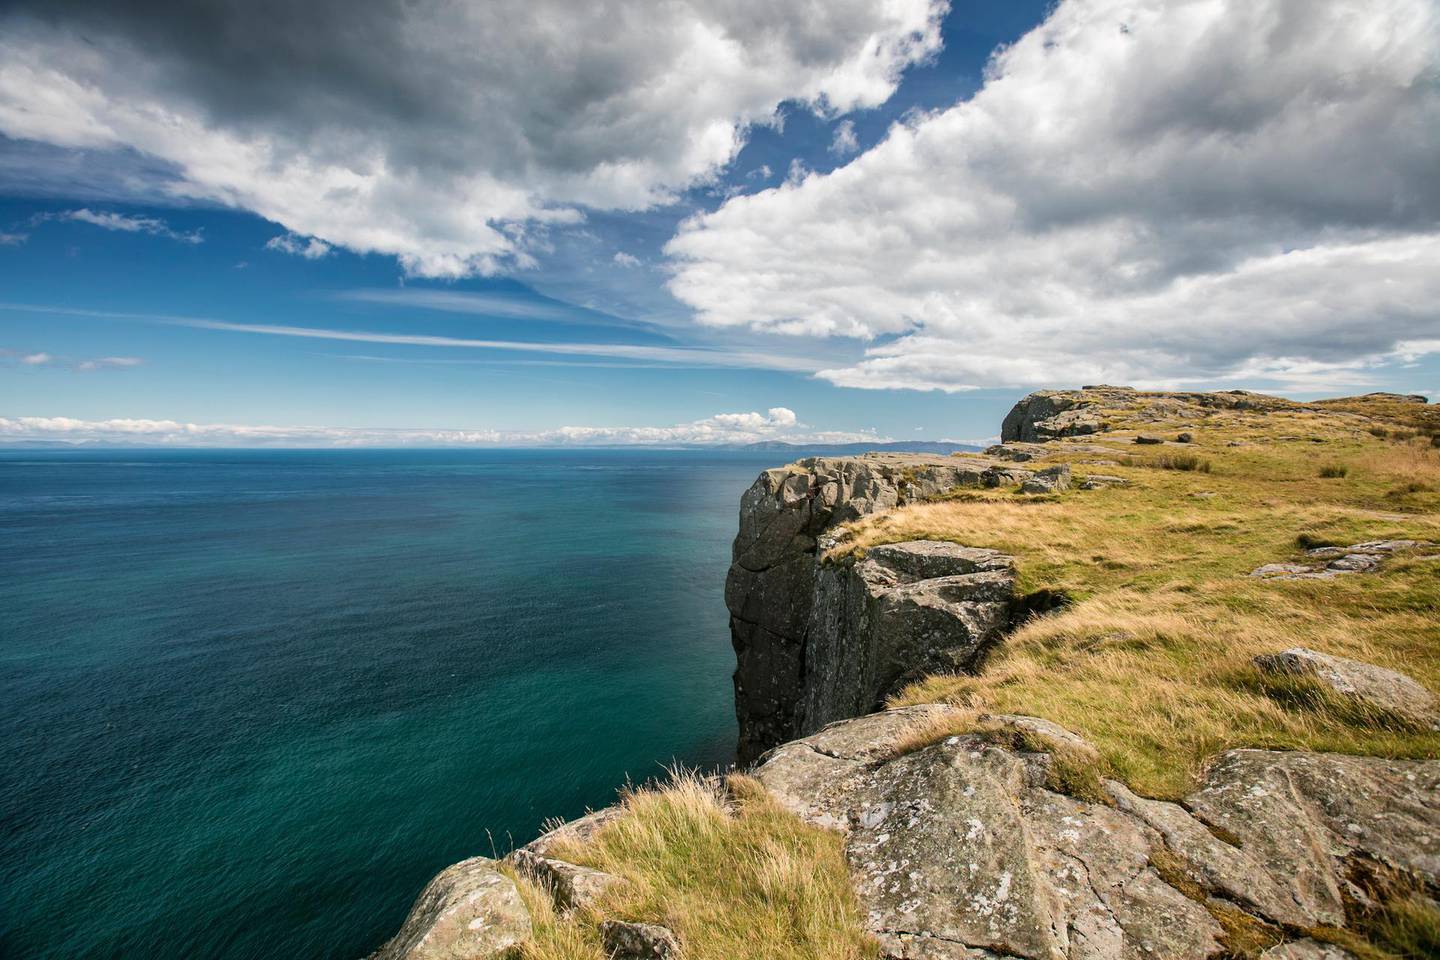 Fair Head, which is known as the Dragonstone Cliffs in 'Game of Thrones'.